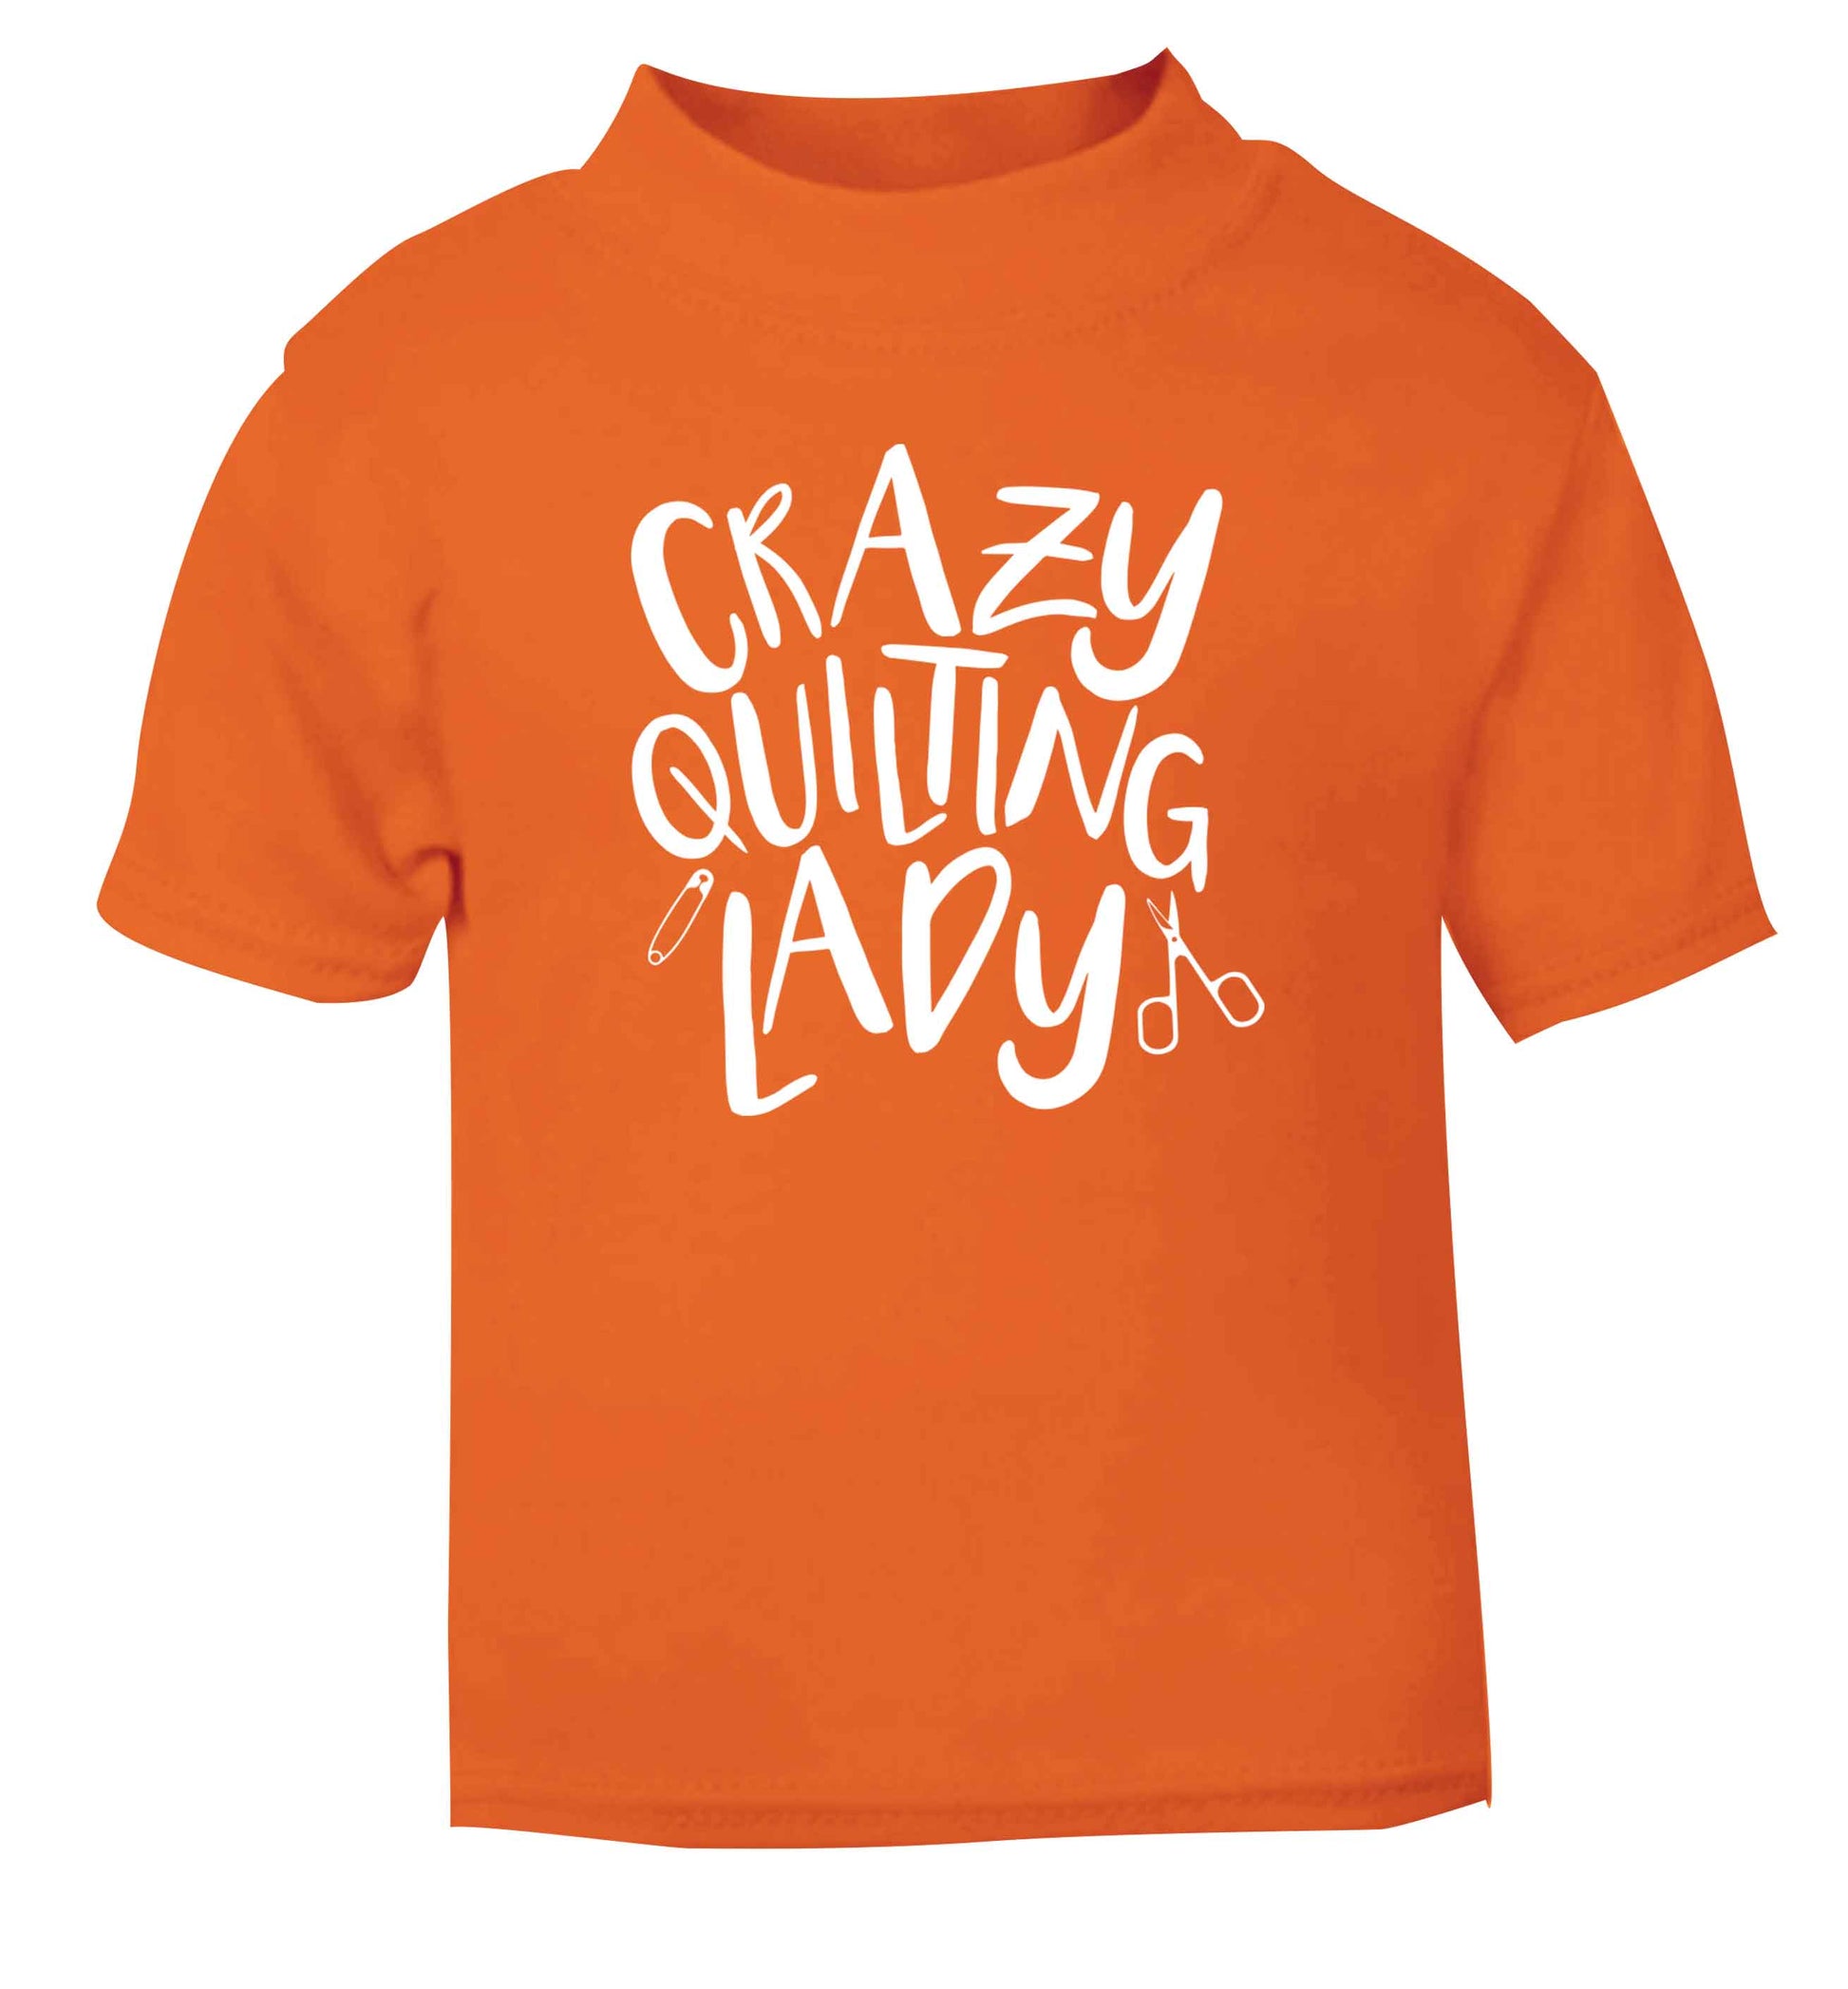 Crazy quilting lady orange Baby Toddler Tshirt 2 Years